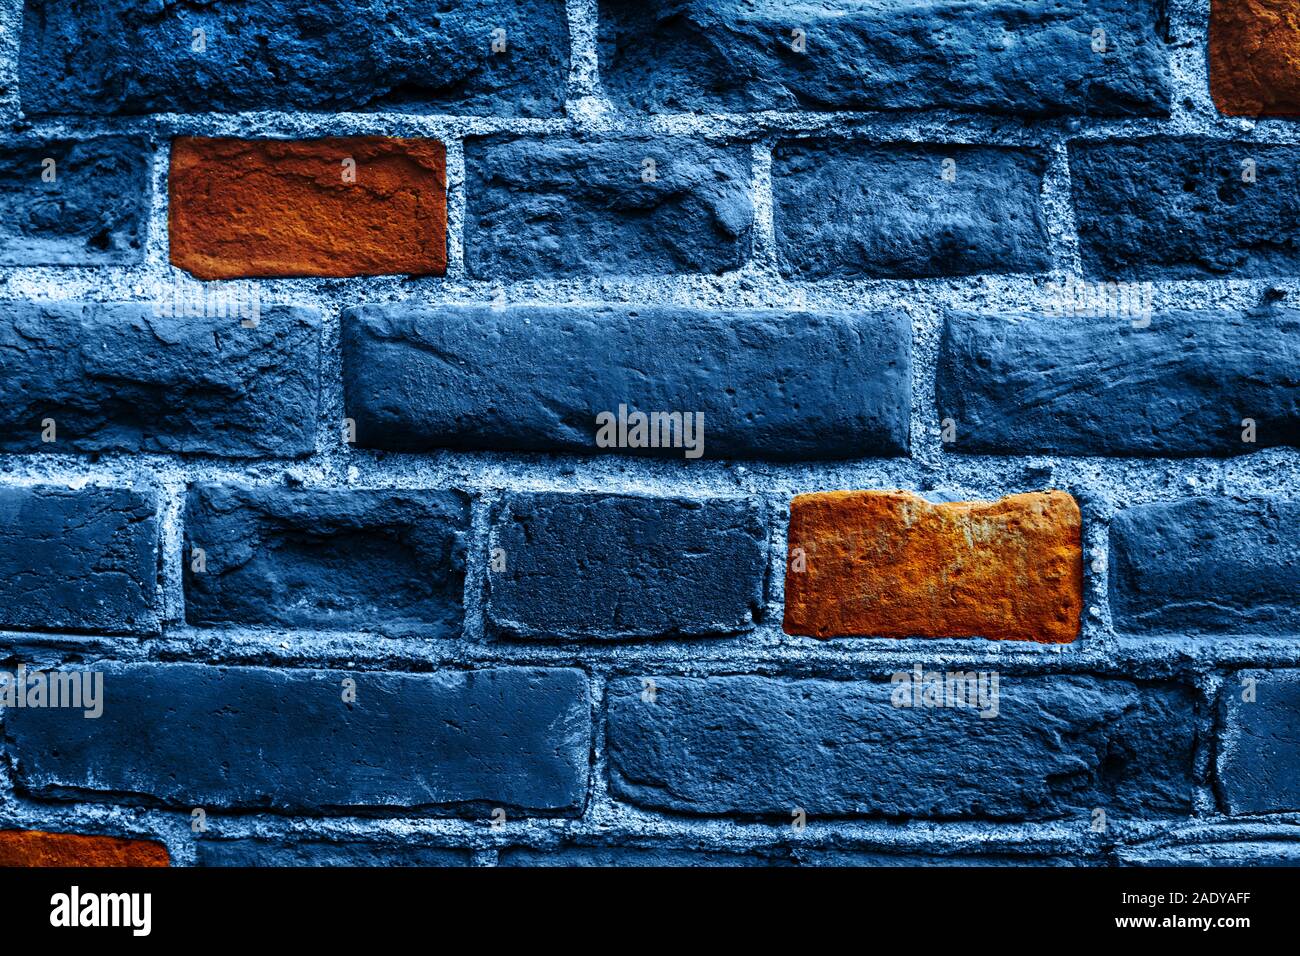 Close up image of old brick wall in blue color with some orange bricks. Background. Stock Photo